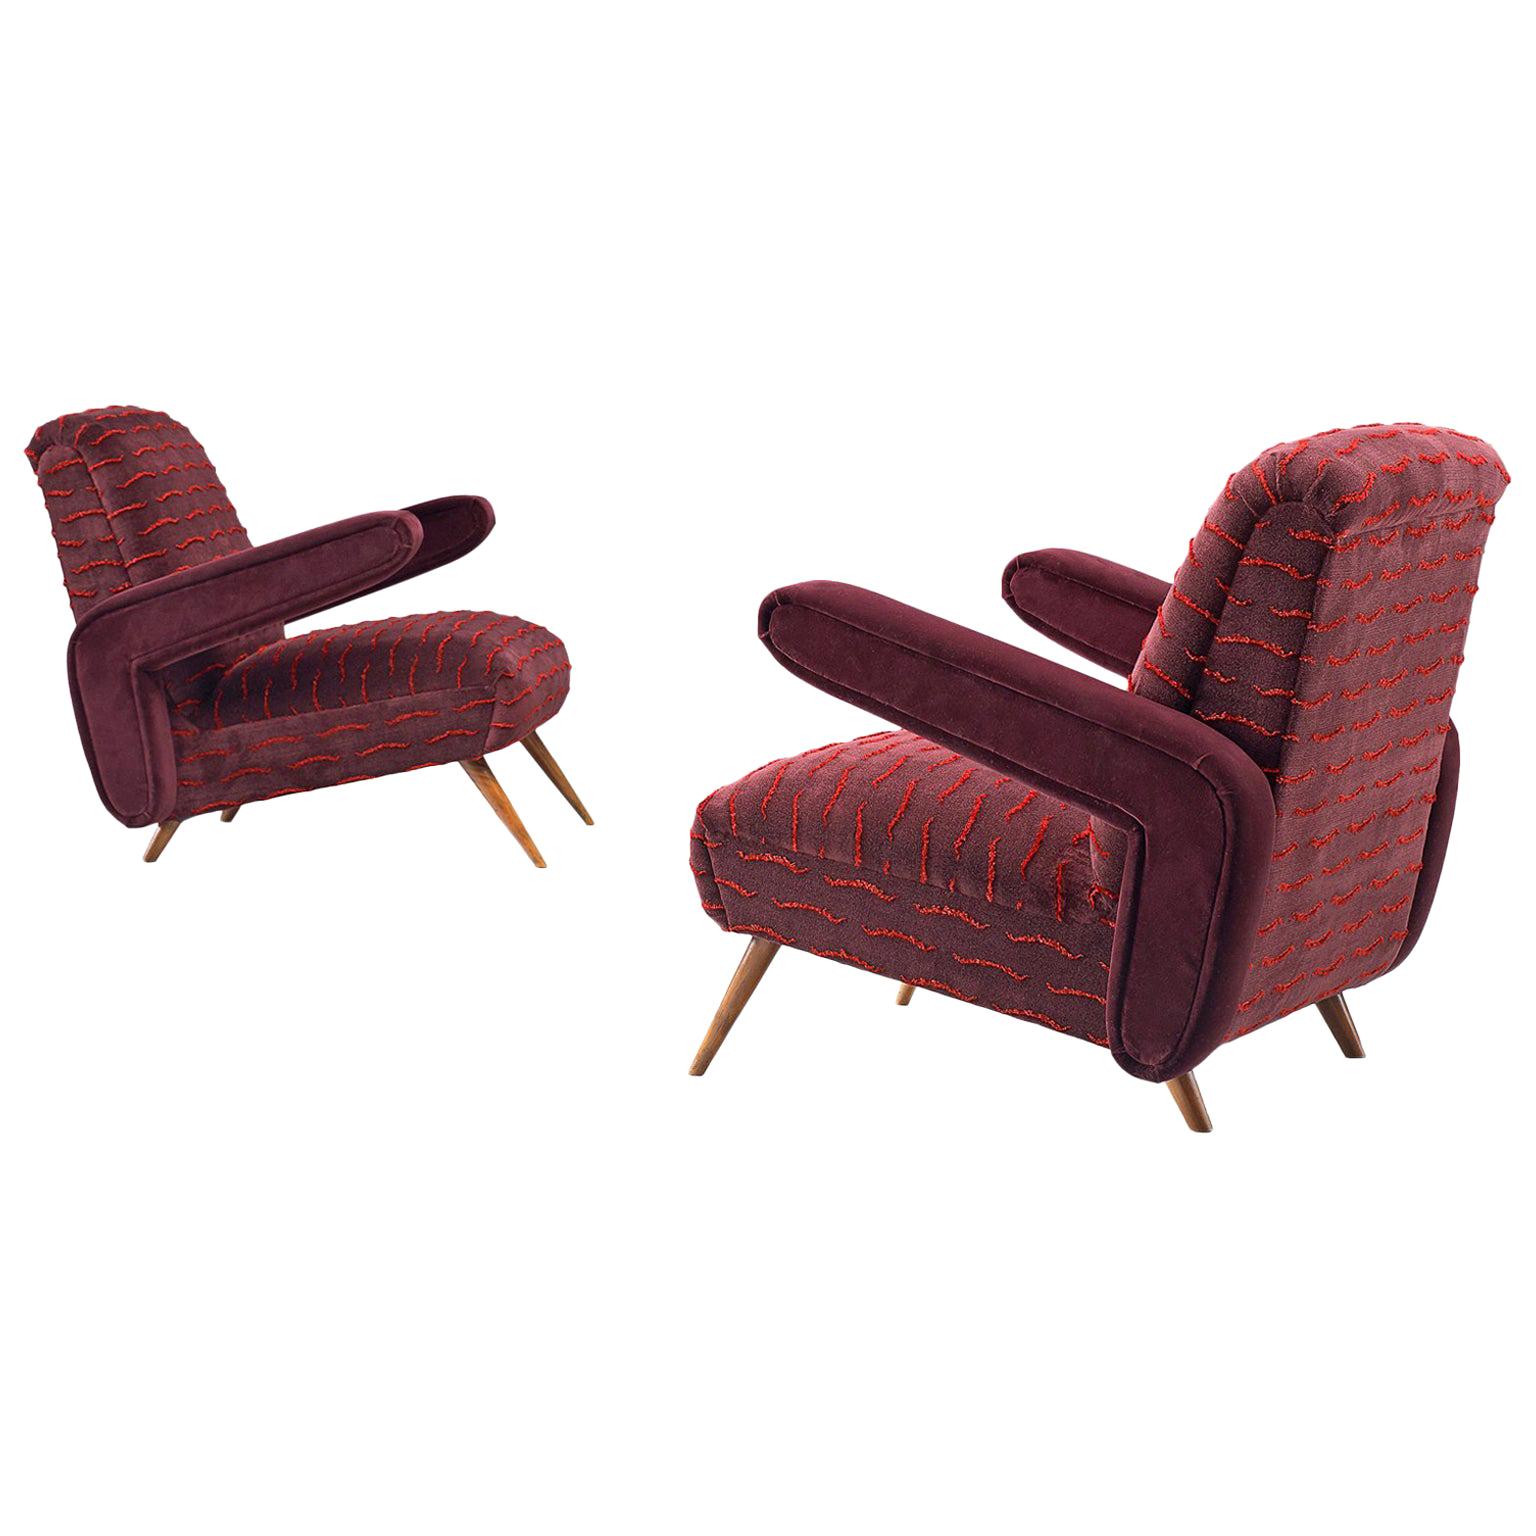 Pair of Giuseppe Scapinelli Armchairs Reupholstered in Luxurious Burgundy Velvet